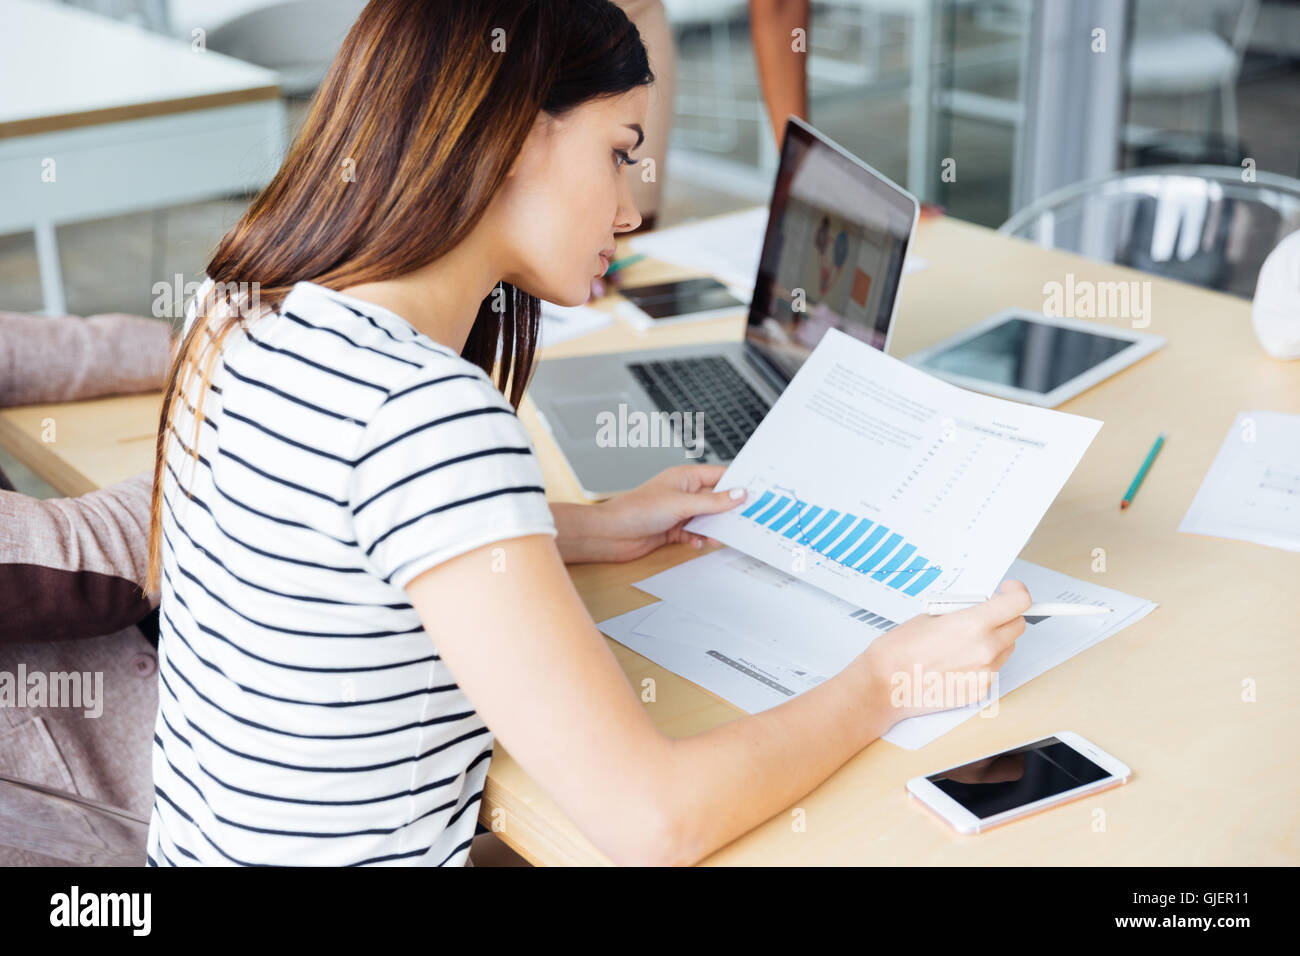 Thoughtful pretty young woman sitting and working on business meeting in office Stock Photo